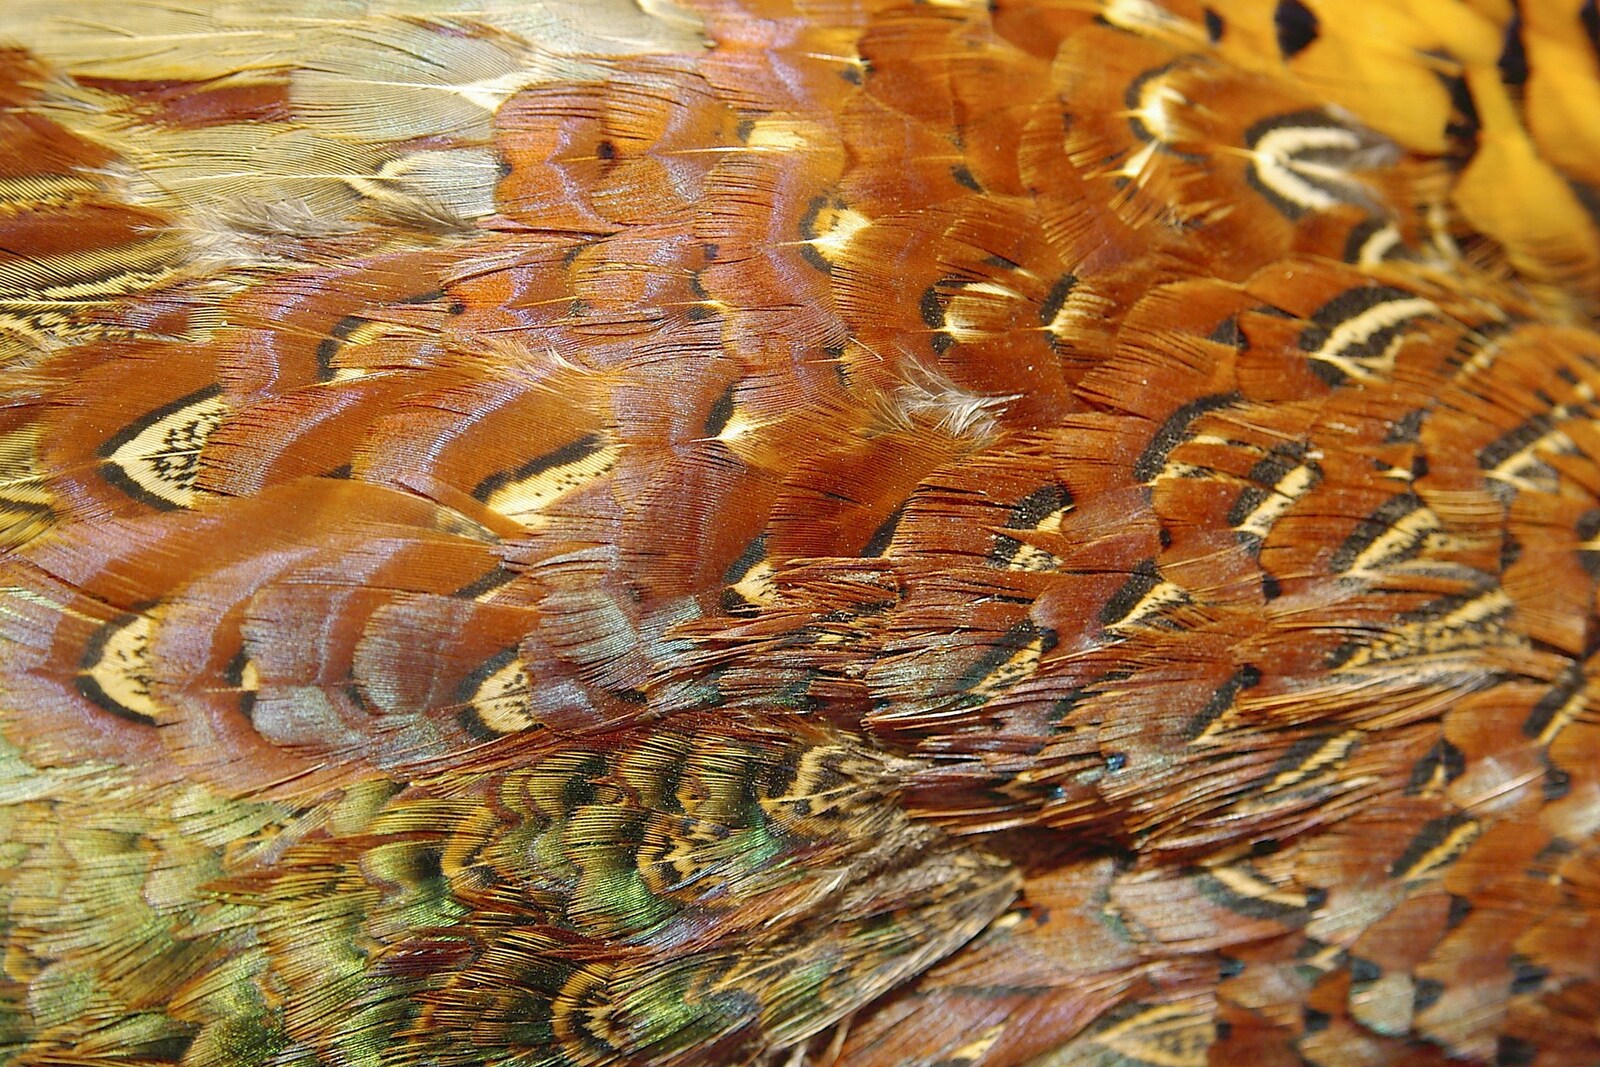 Studies of Pheasant plumage from Pheasants, Sunsets and The BBs at Bressingham, Norfolk - 11th December 2005